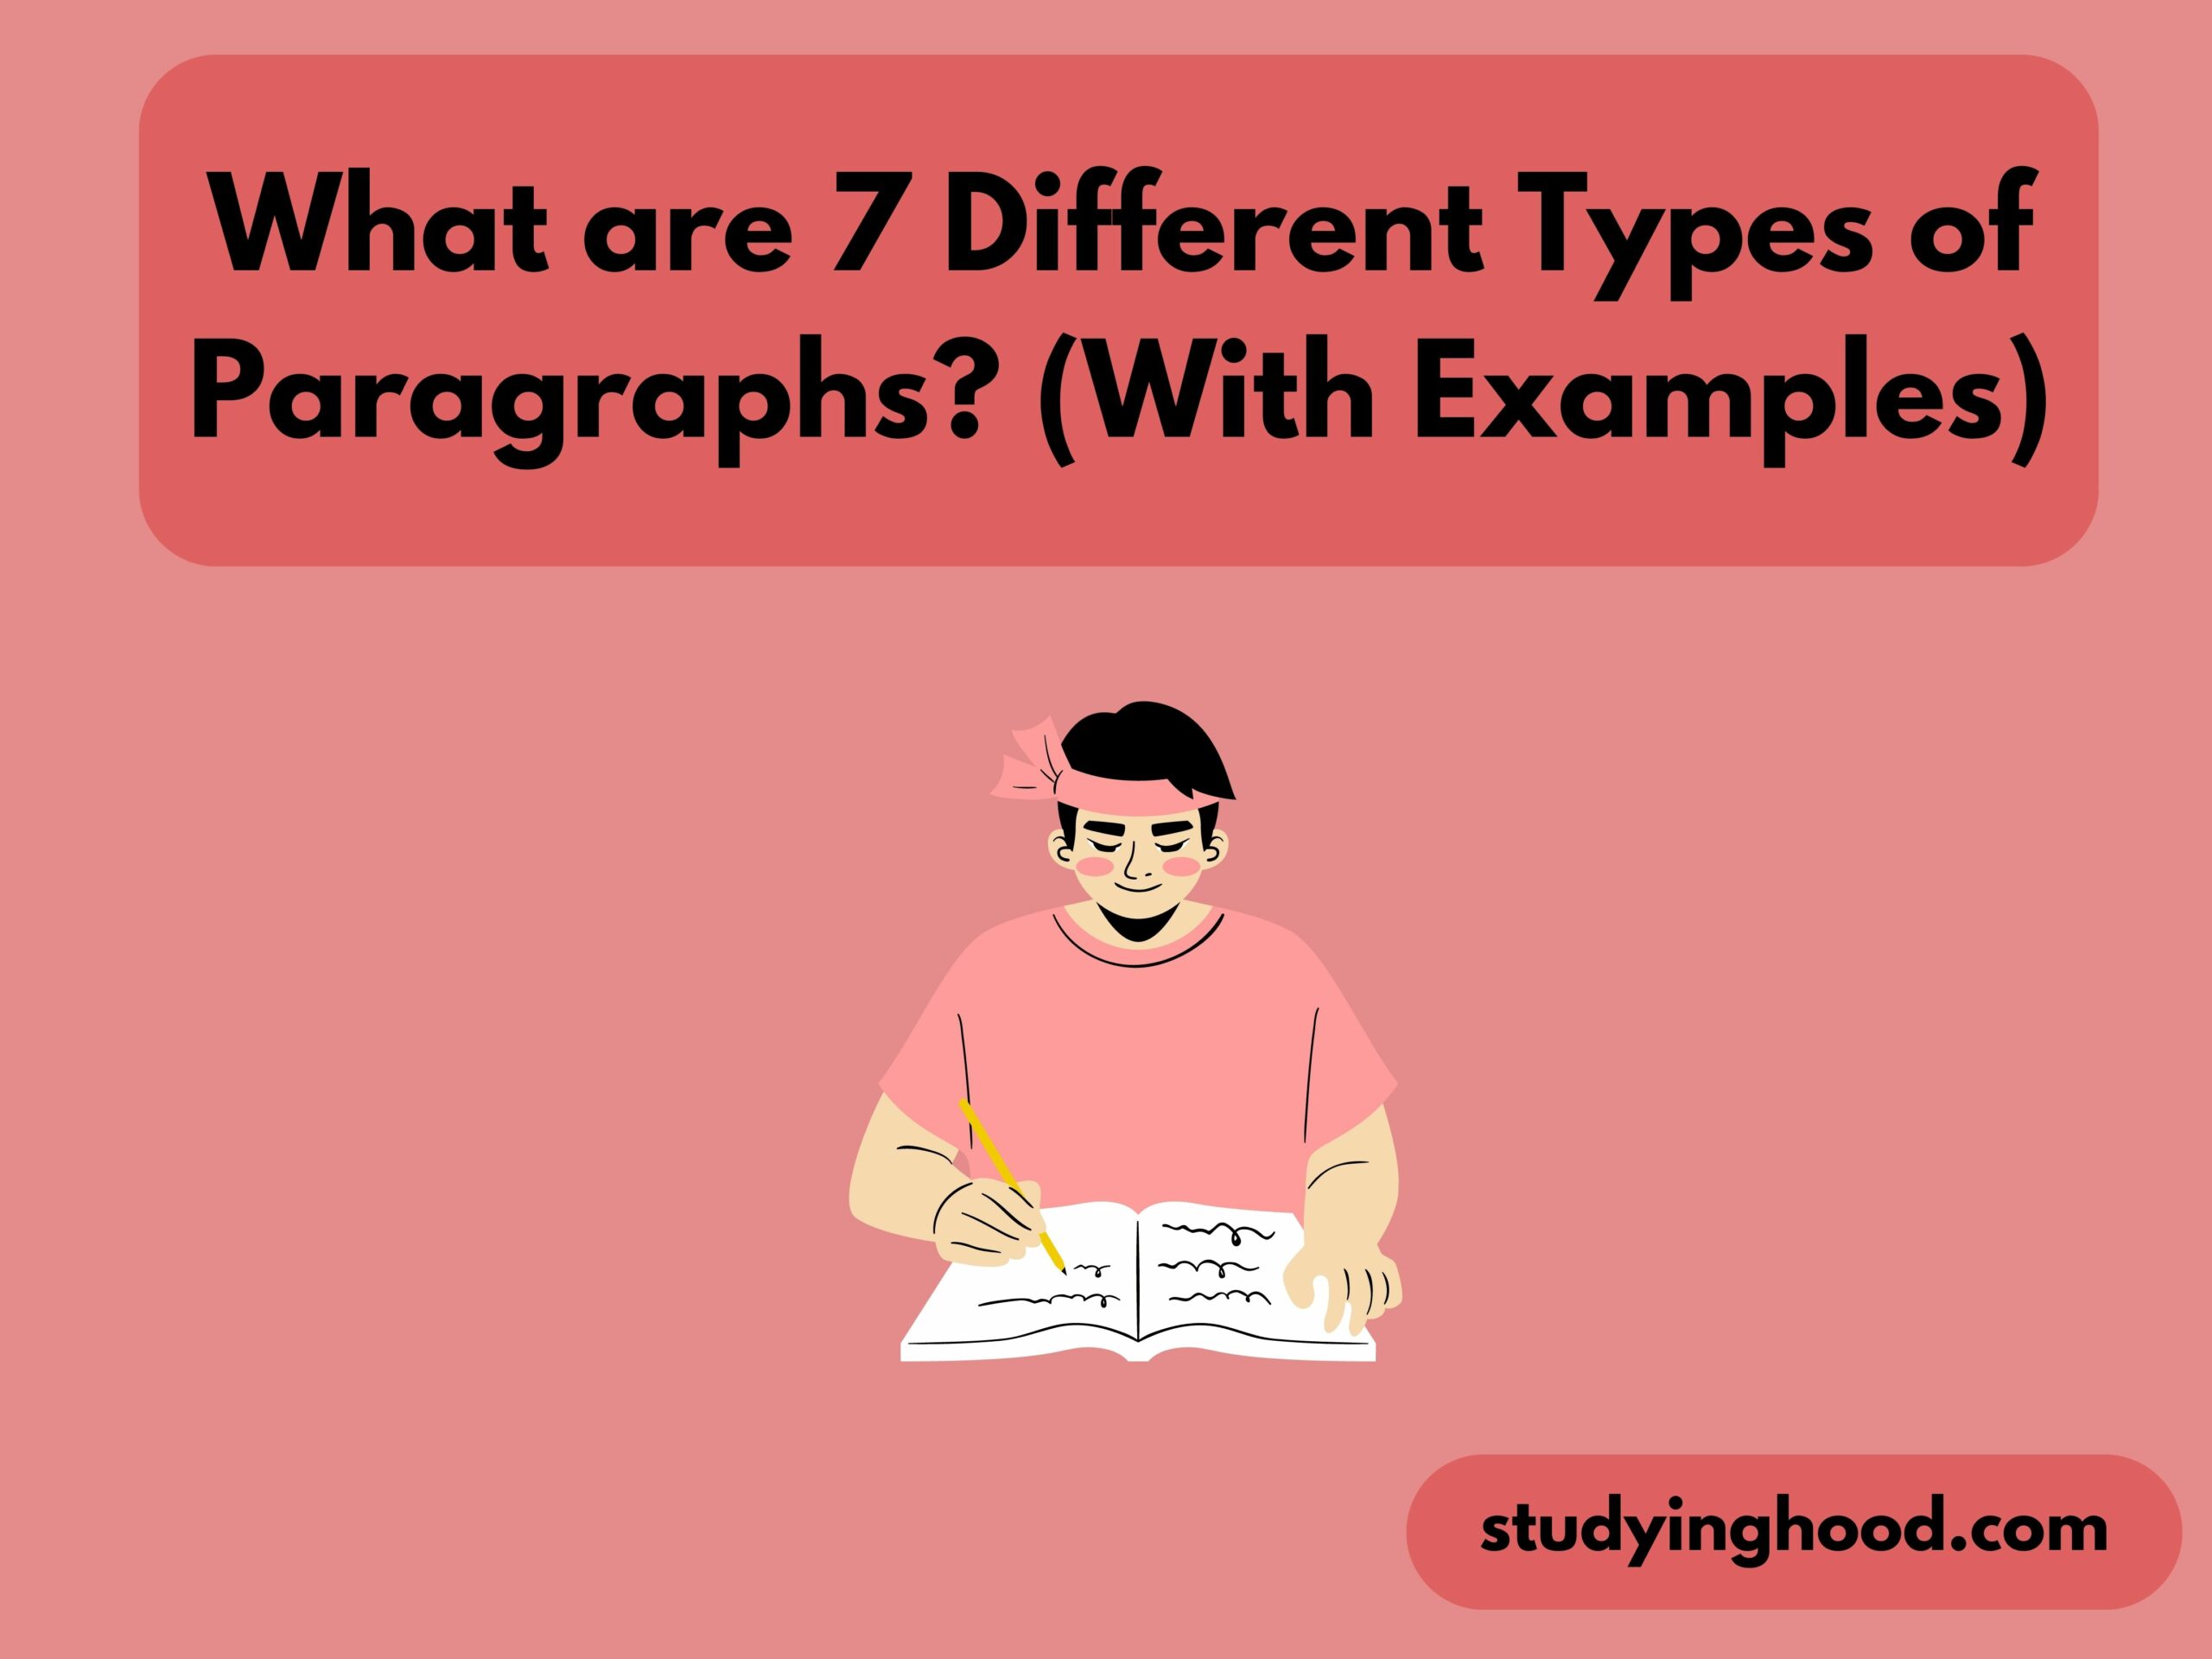 What are 7 Different Types of Paragraphs? (With Examples)